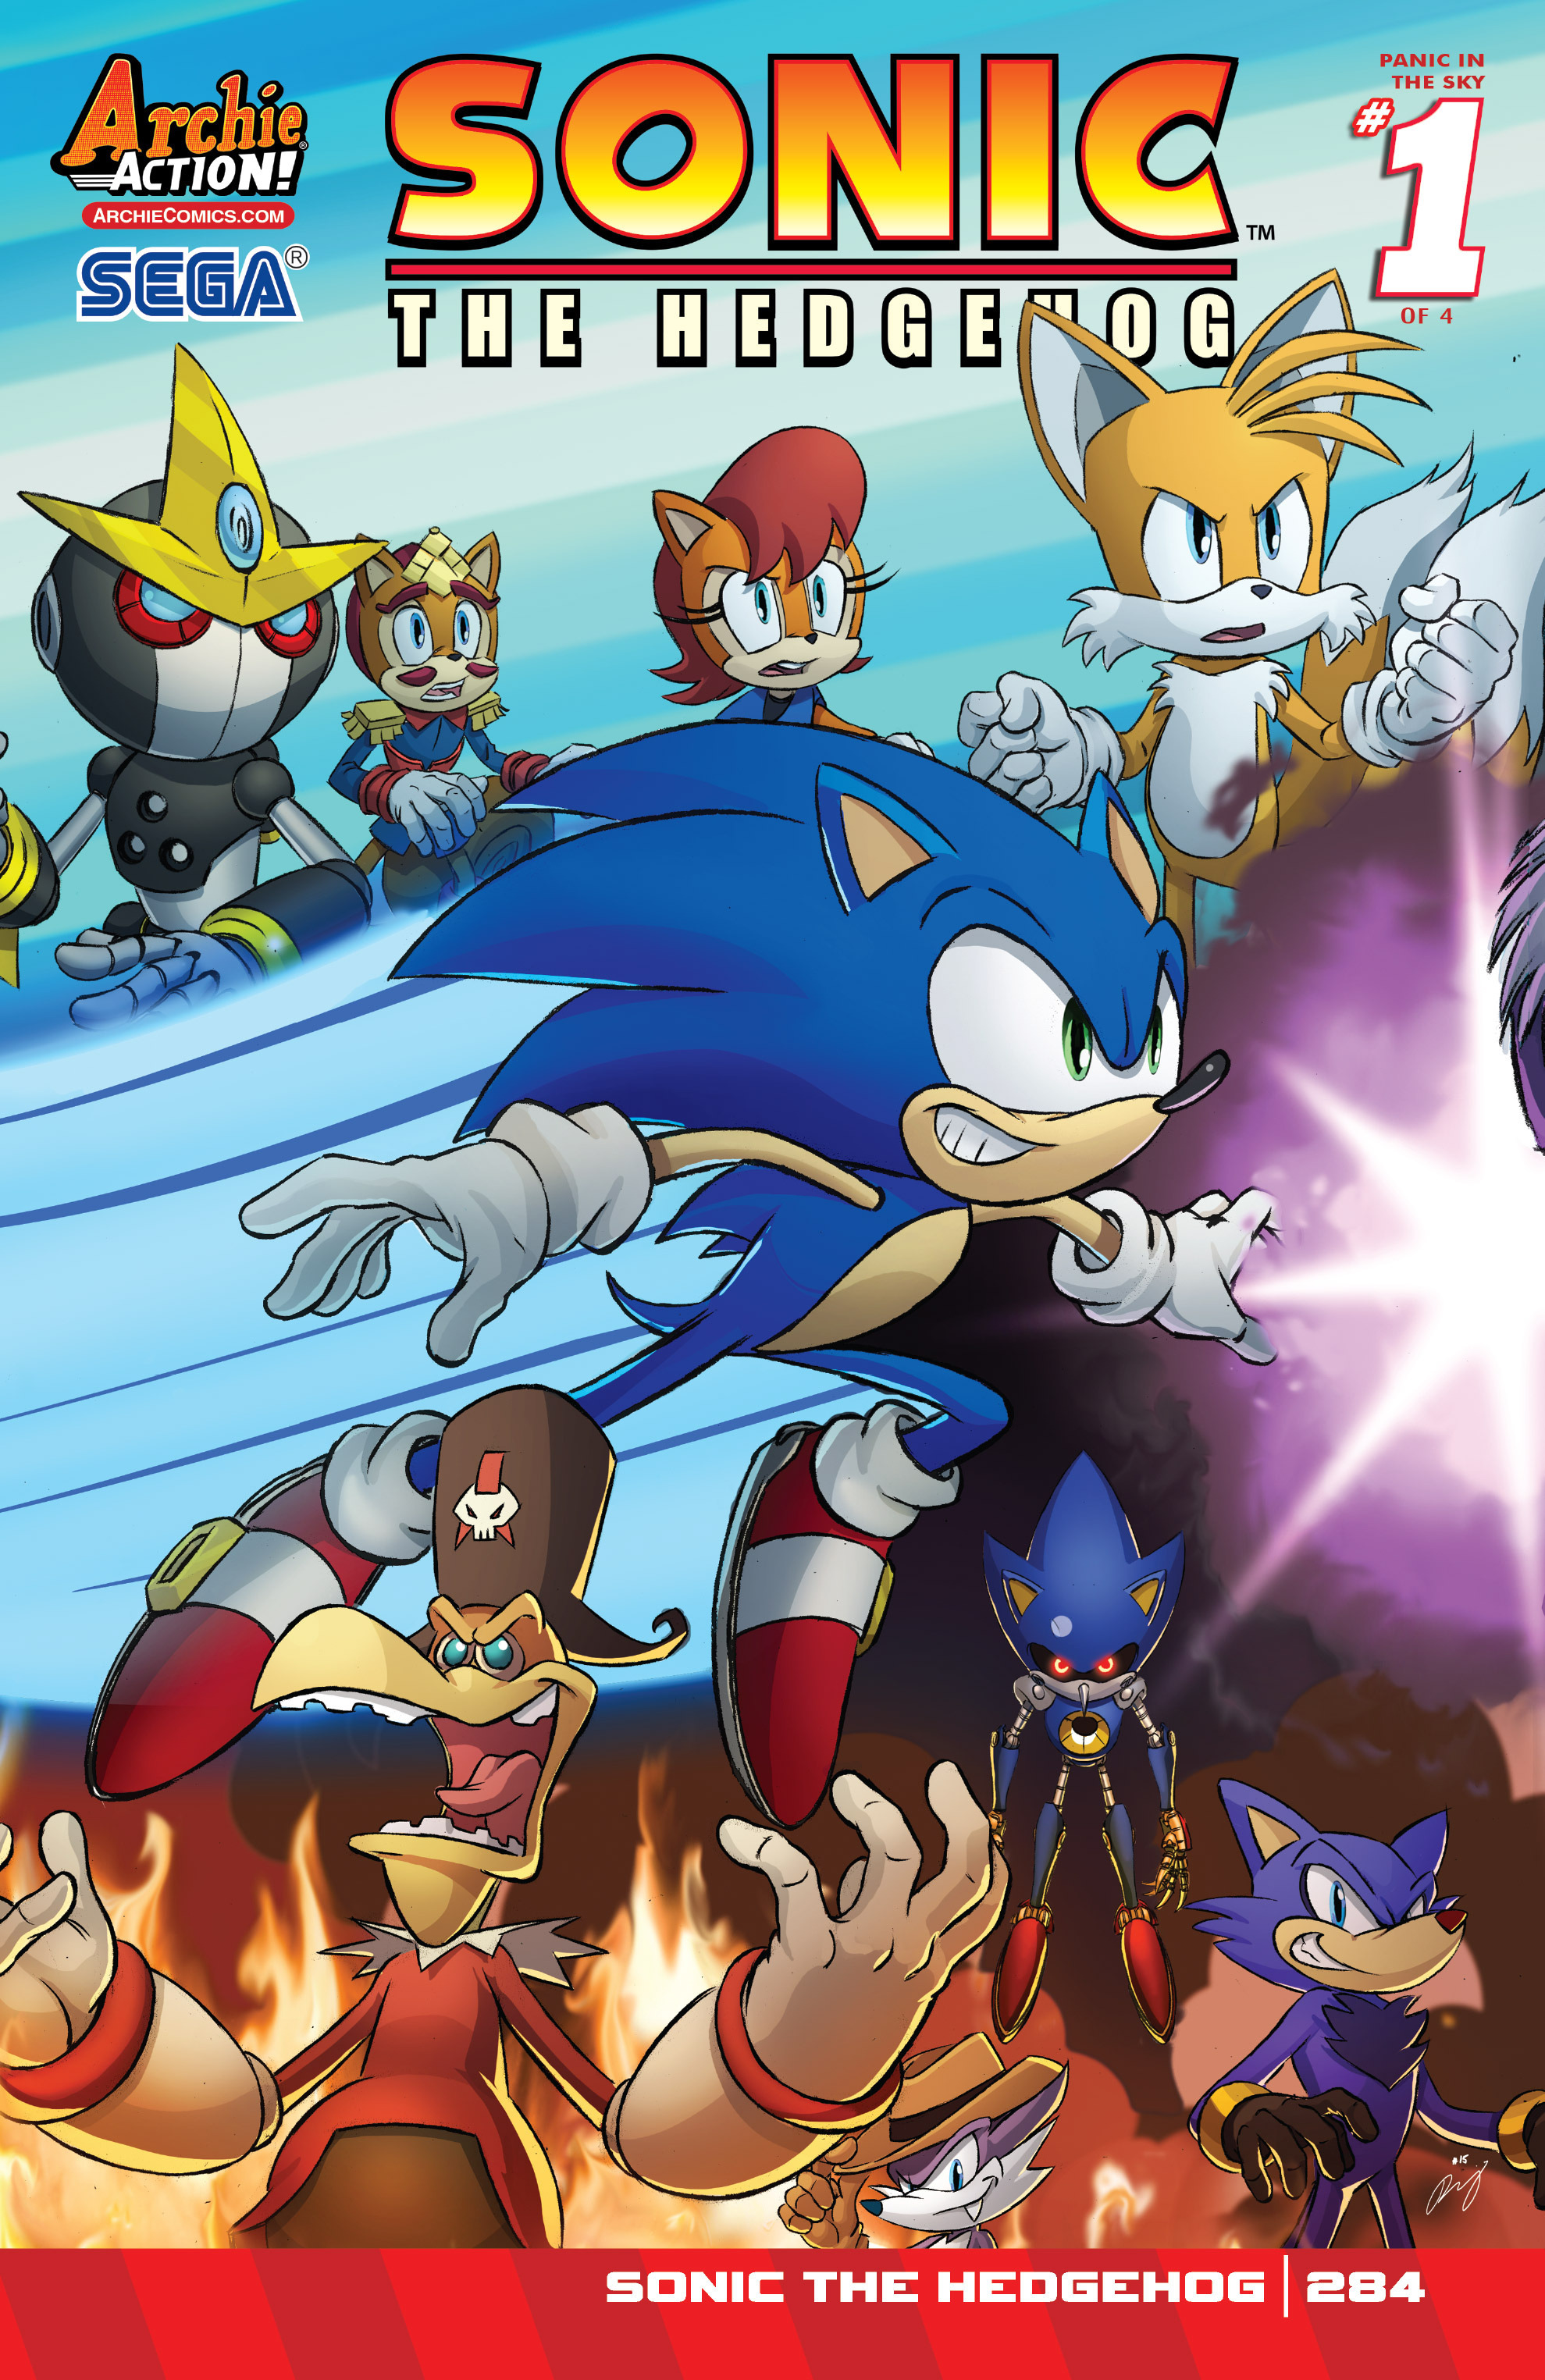 Archie Sonic the Hedgehog Issue 284 | Sonic News Network | FANDOM powered by Wikia1979 x 3049